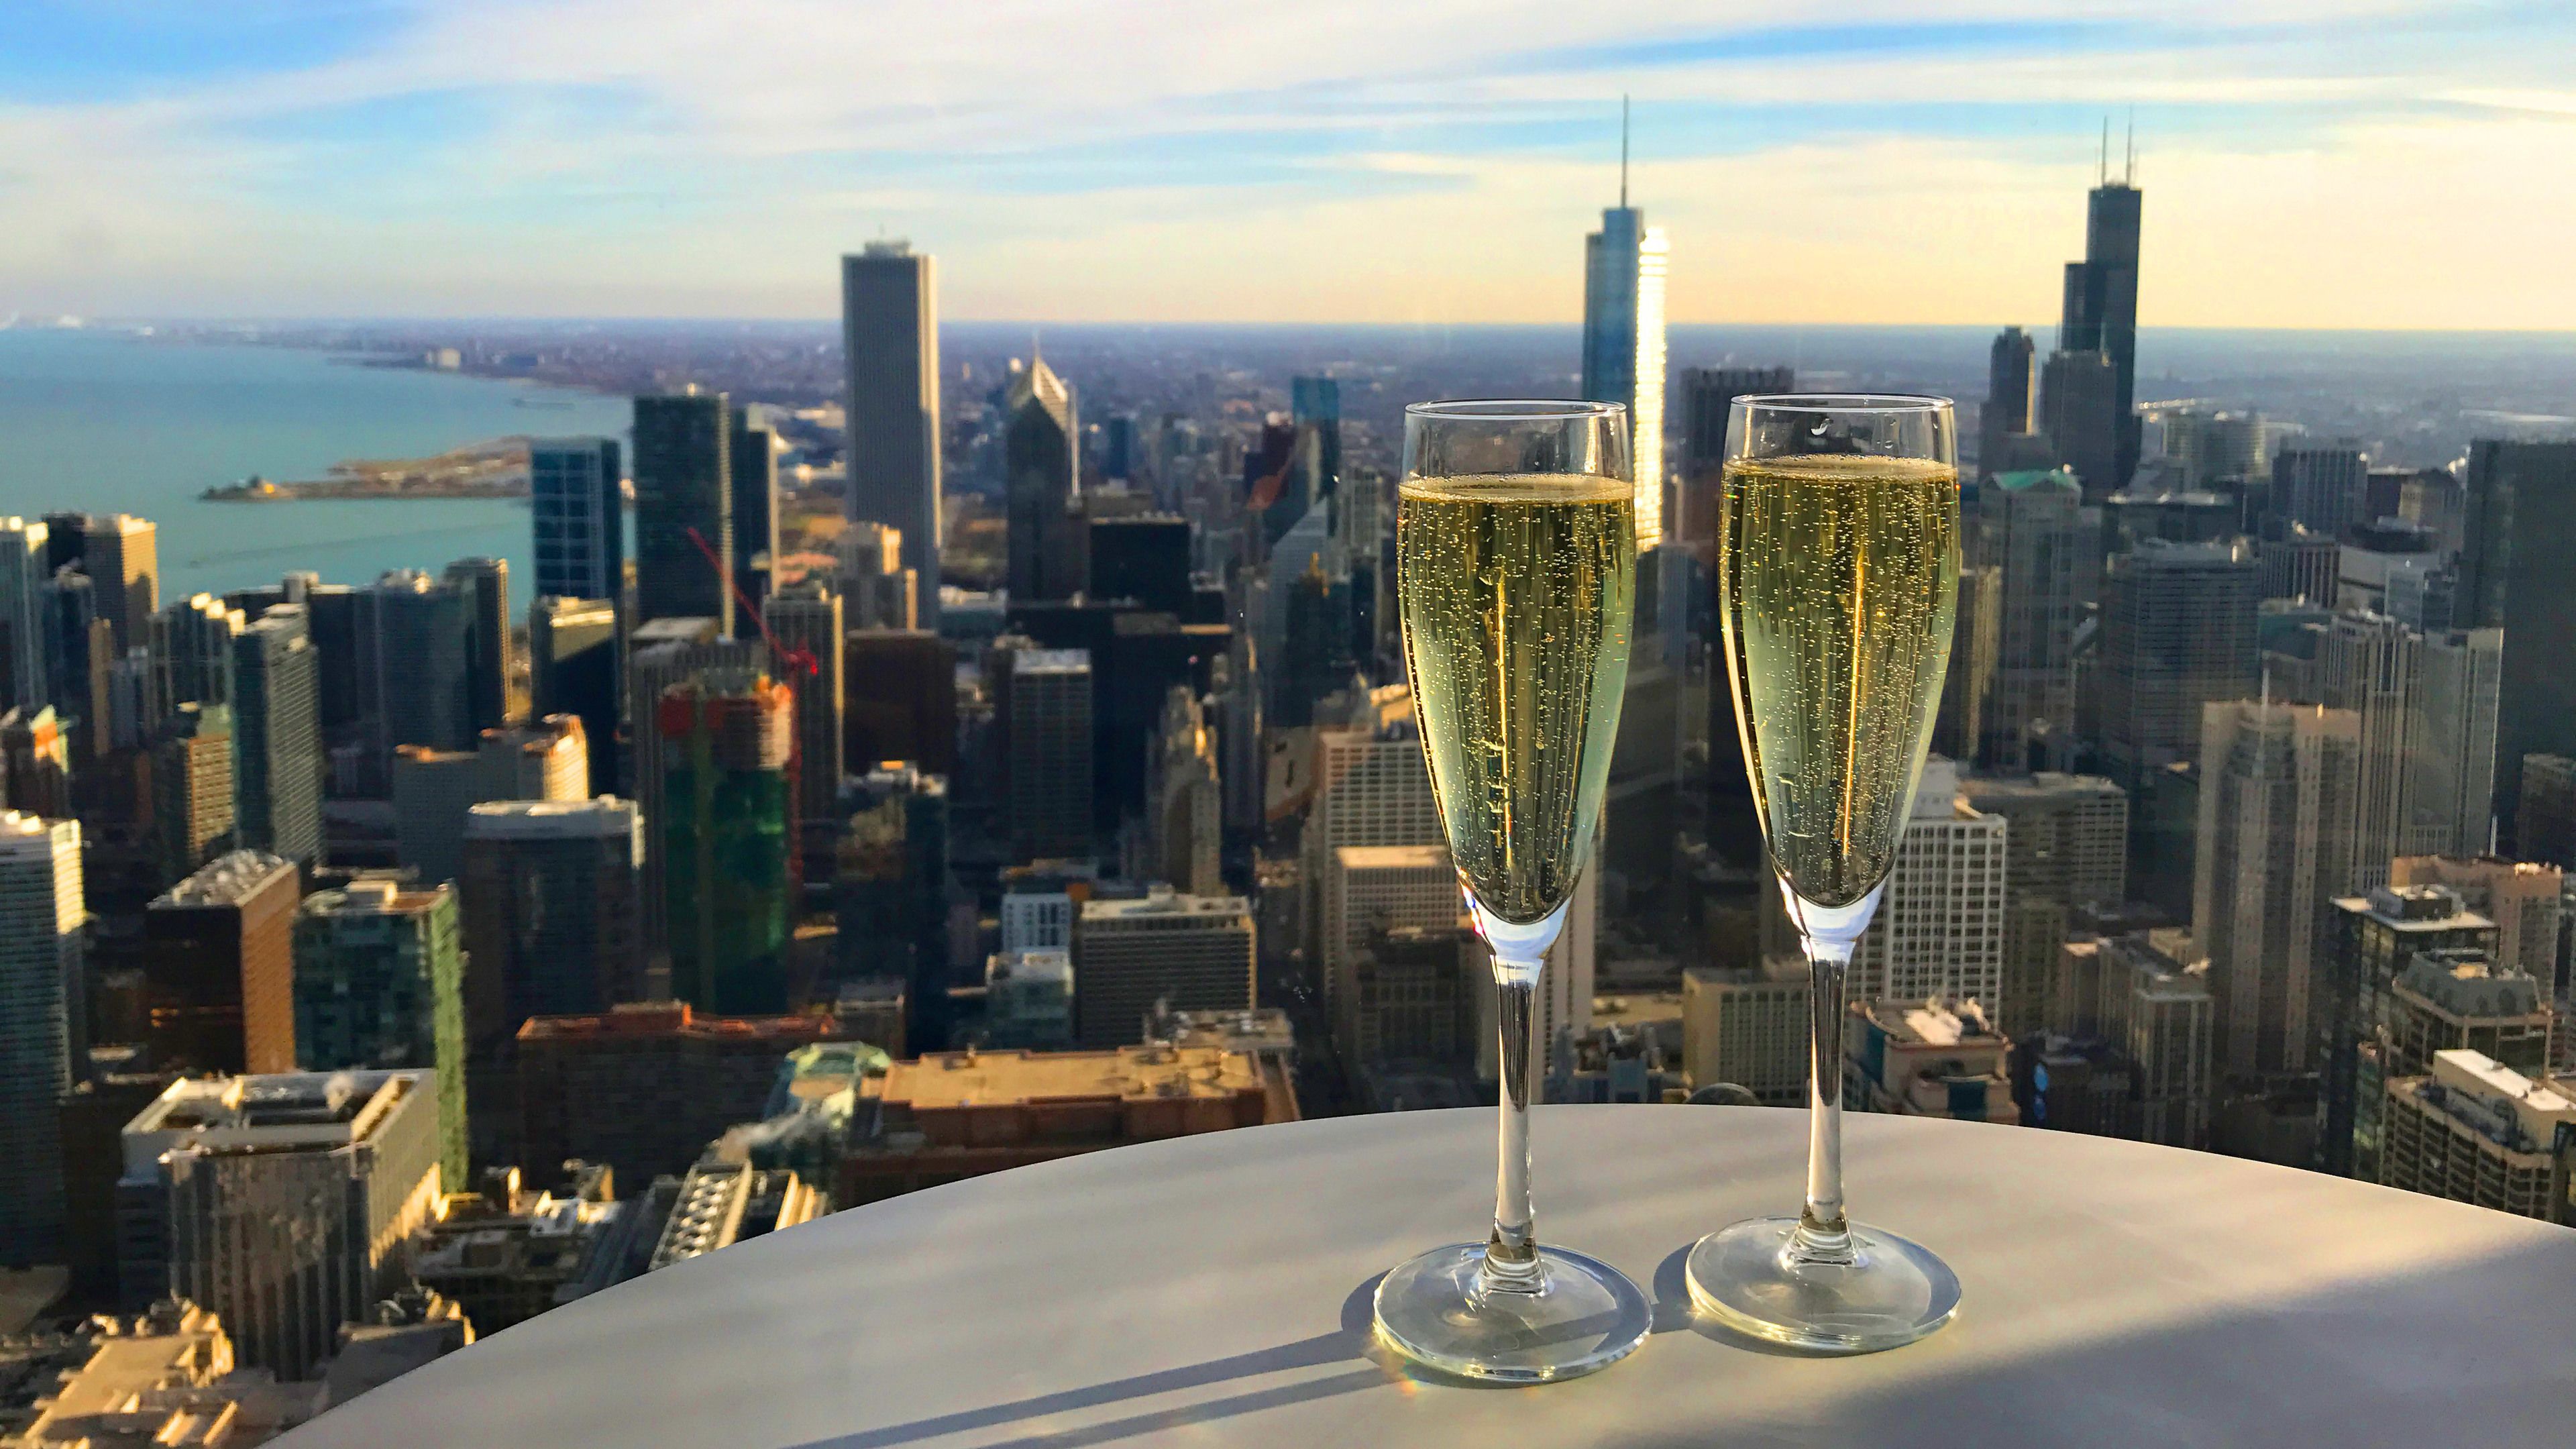 Sparkling Chicago 360 Chicago Observation Deck for 2 with Prosecco